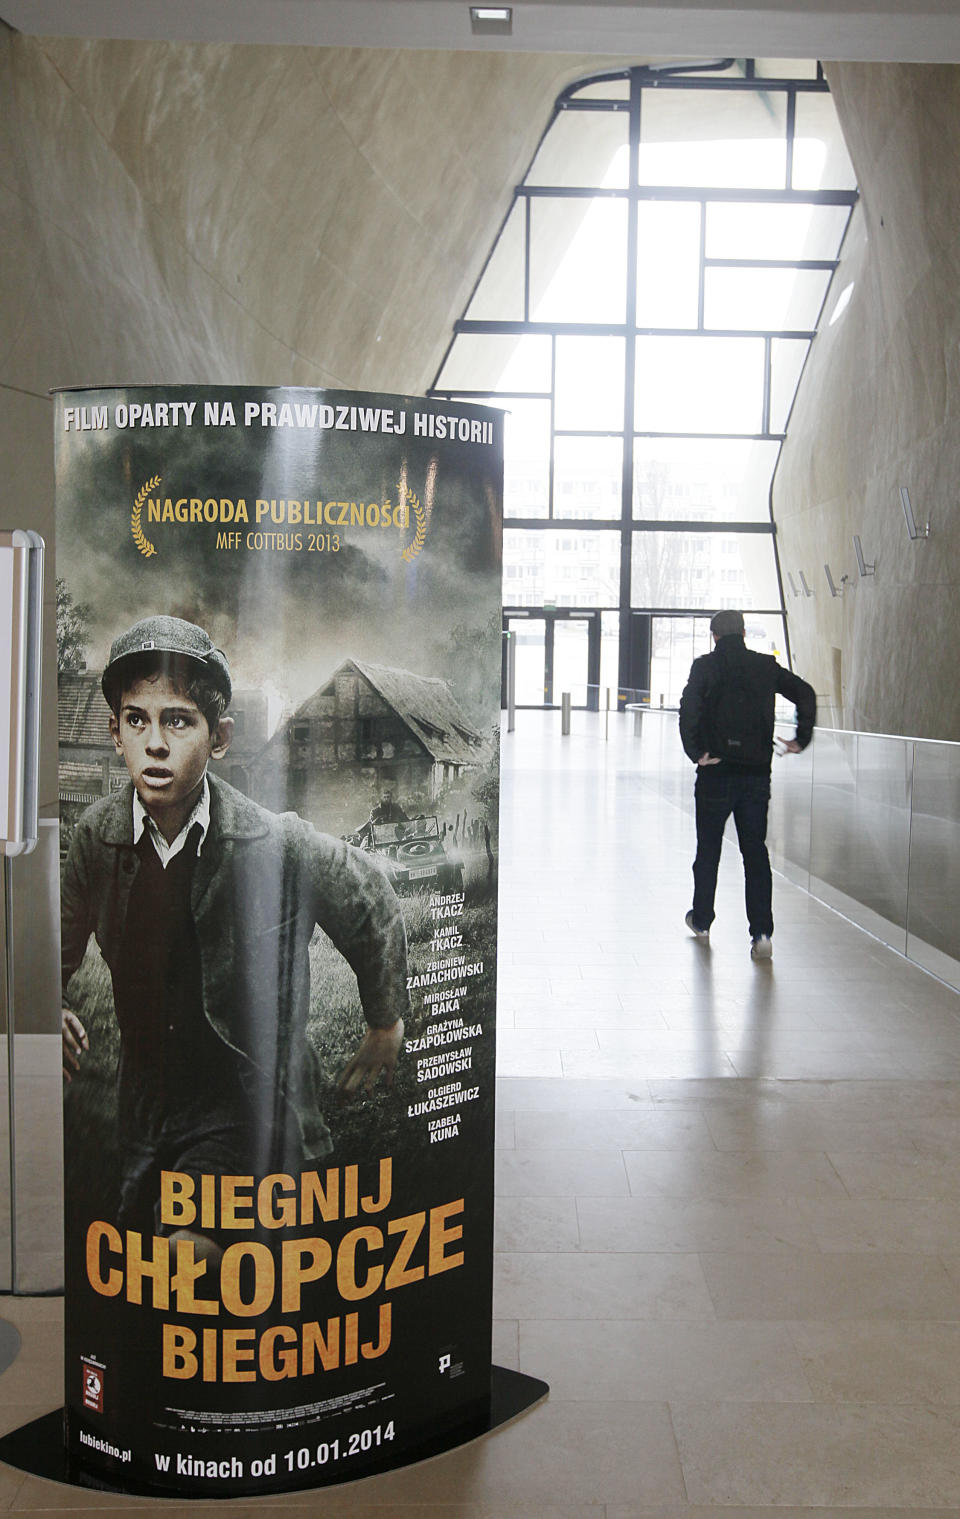 Posters advertising the movie "Run, Boy, Run" are displayed at the Museum of the History of Polish Jews prior to the world premiere of the movie by German Oscar-winning director Pepe Danquart about a Jewish boy struggling to survive the Holocaust, in Warsaw, Poland, Wednesday, Jan. 8, 2014. The movie is based on a true story of 10-year-old Yoram Friedman who escaped the Warsaw ghetto in 1943 and, hunted by the Nazis, hid in the woods near the city. (AP Photo/Czarek Sokolowski)